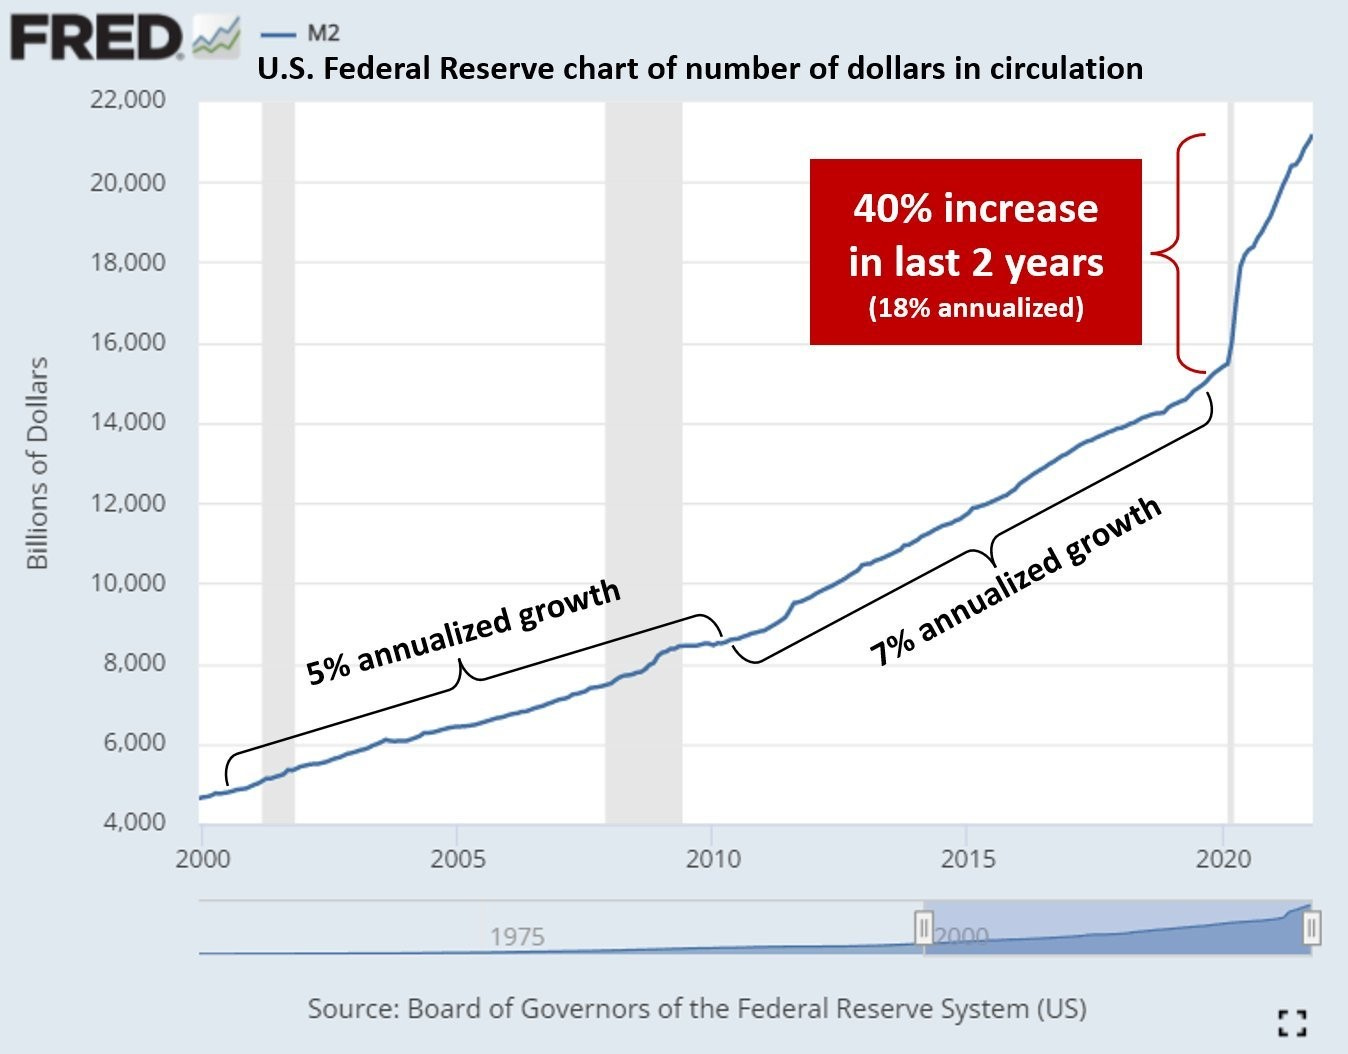 FRED 
U.S. Federal Reserve chart of number of dollars in circulation 
40% increase 
in last 2 years 
(18% annualized) 
o 
o 
o 
22,000 
20,000 
18,000 
16,000 
14,000 
12,000 
10,000 
8,000 
6,000 
4,000 
2000 
9/0 annualized 
2005 
1975 
2010 
1010 
2015 
2020 
Source: Board of Governors of the Federal Reserve System (US) 